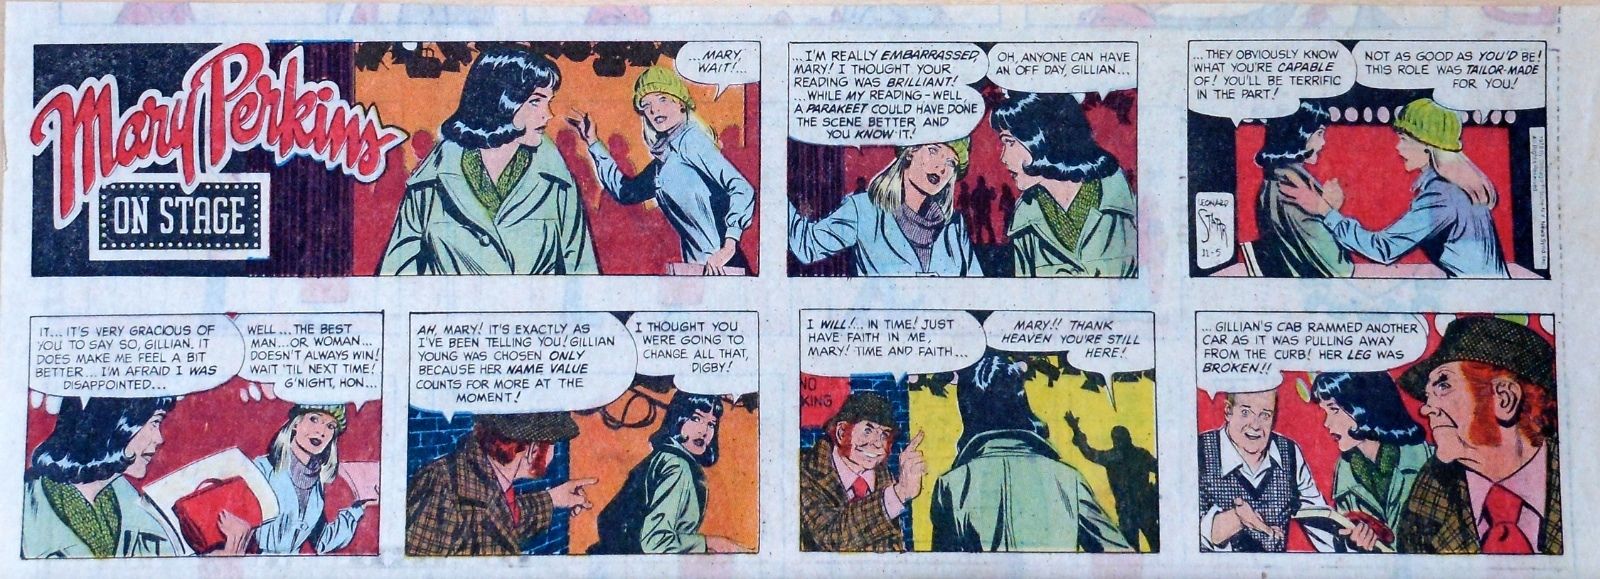 Mary Perkins On Stage by Leonard Starr - lot of 15 Sunday comic pages, late 1978